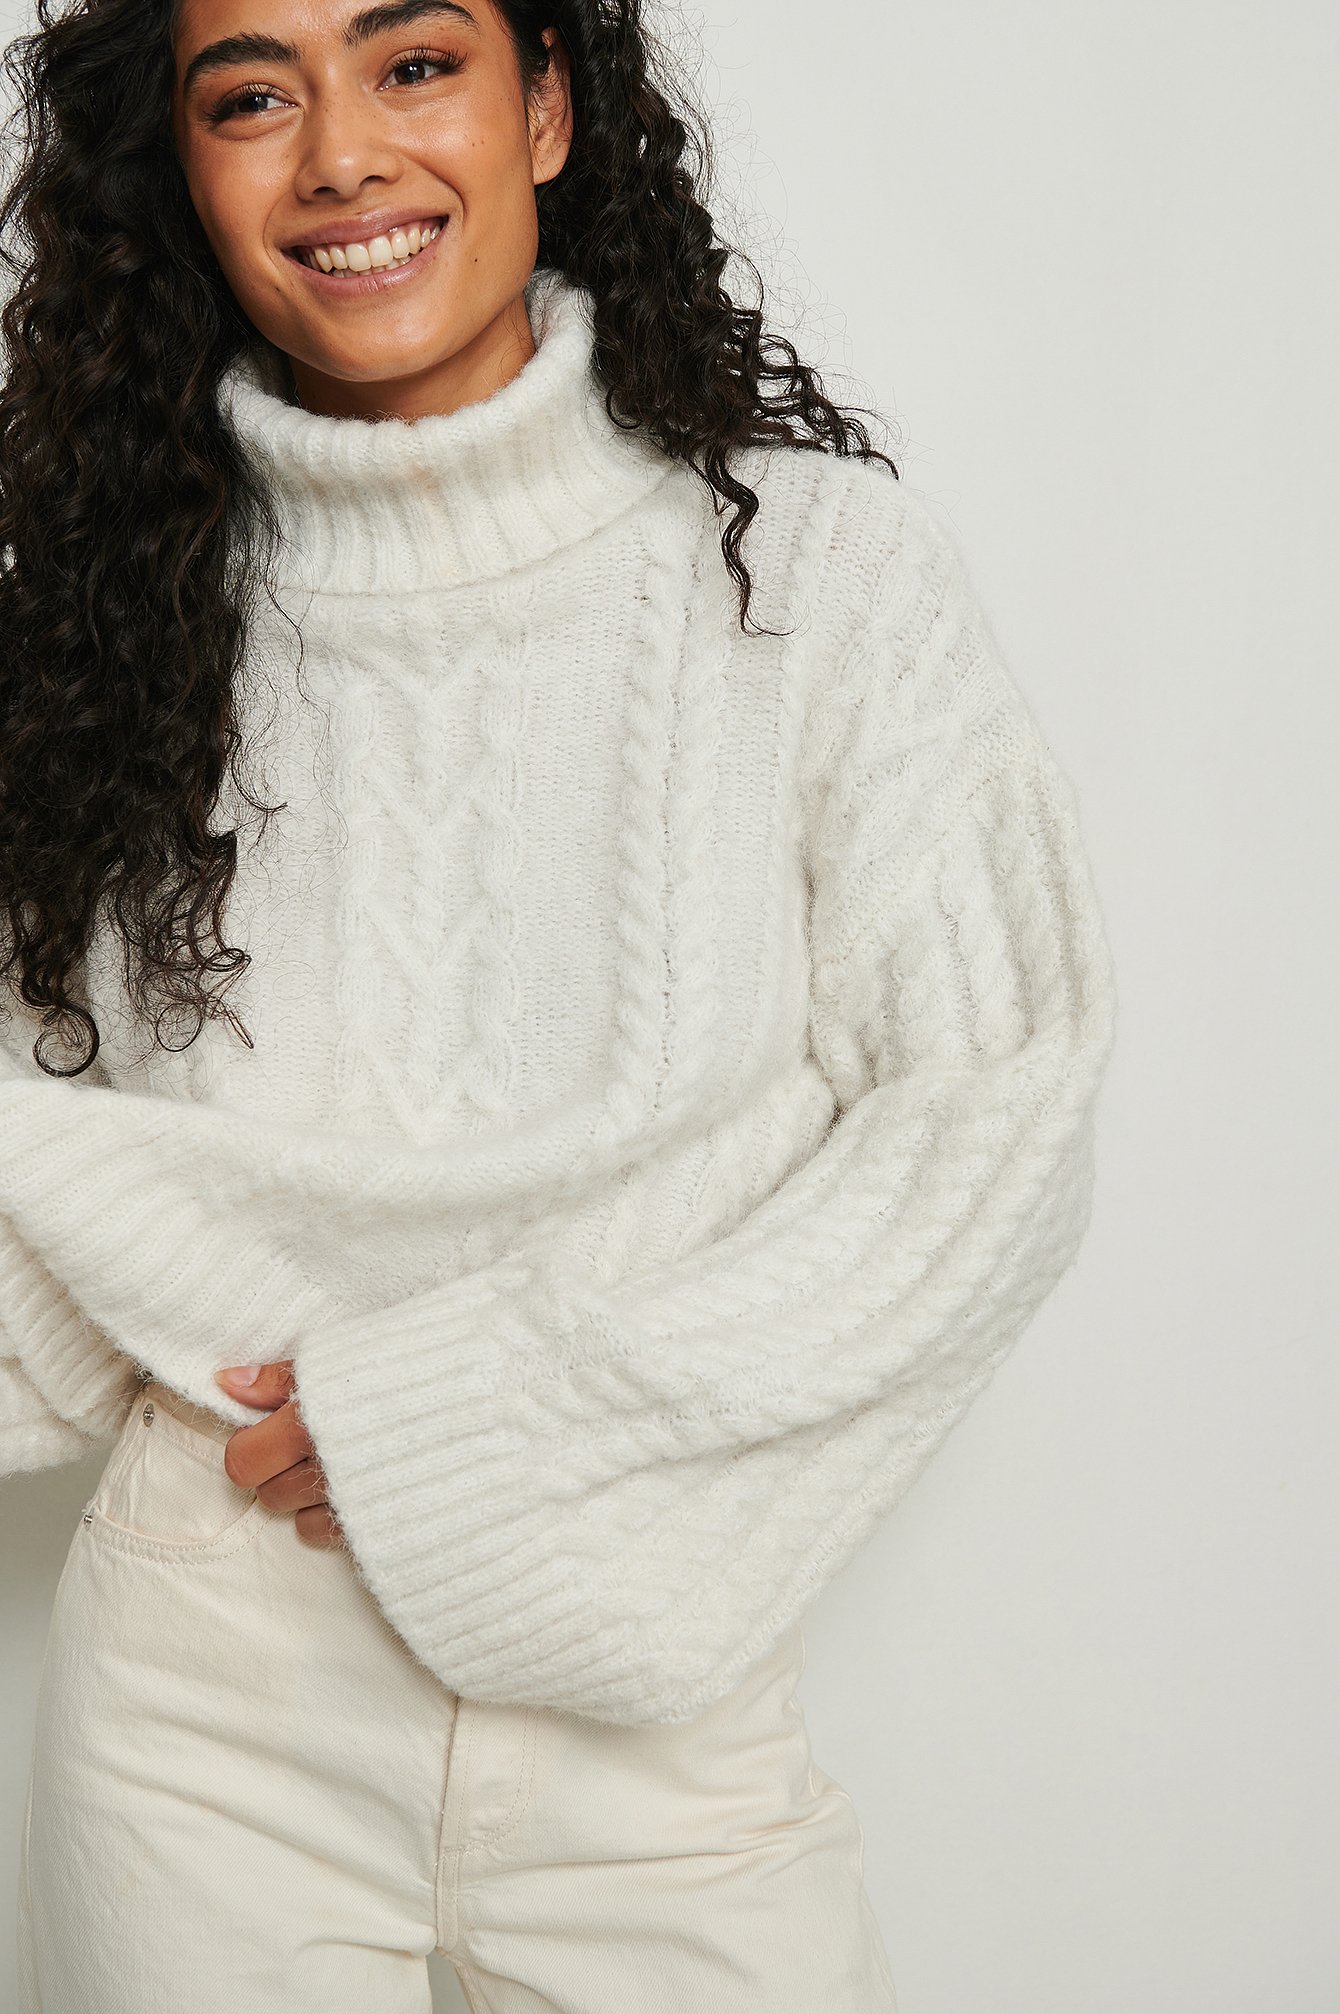 White Boxy Cable Knit High Neck Sweater